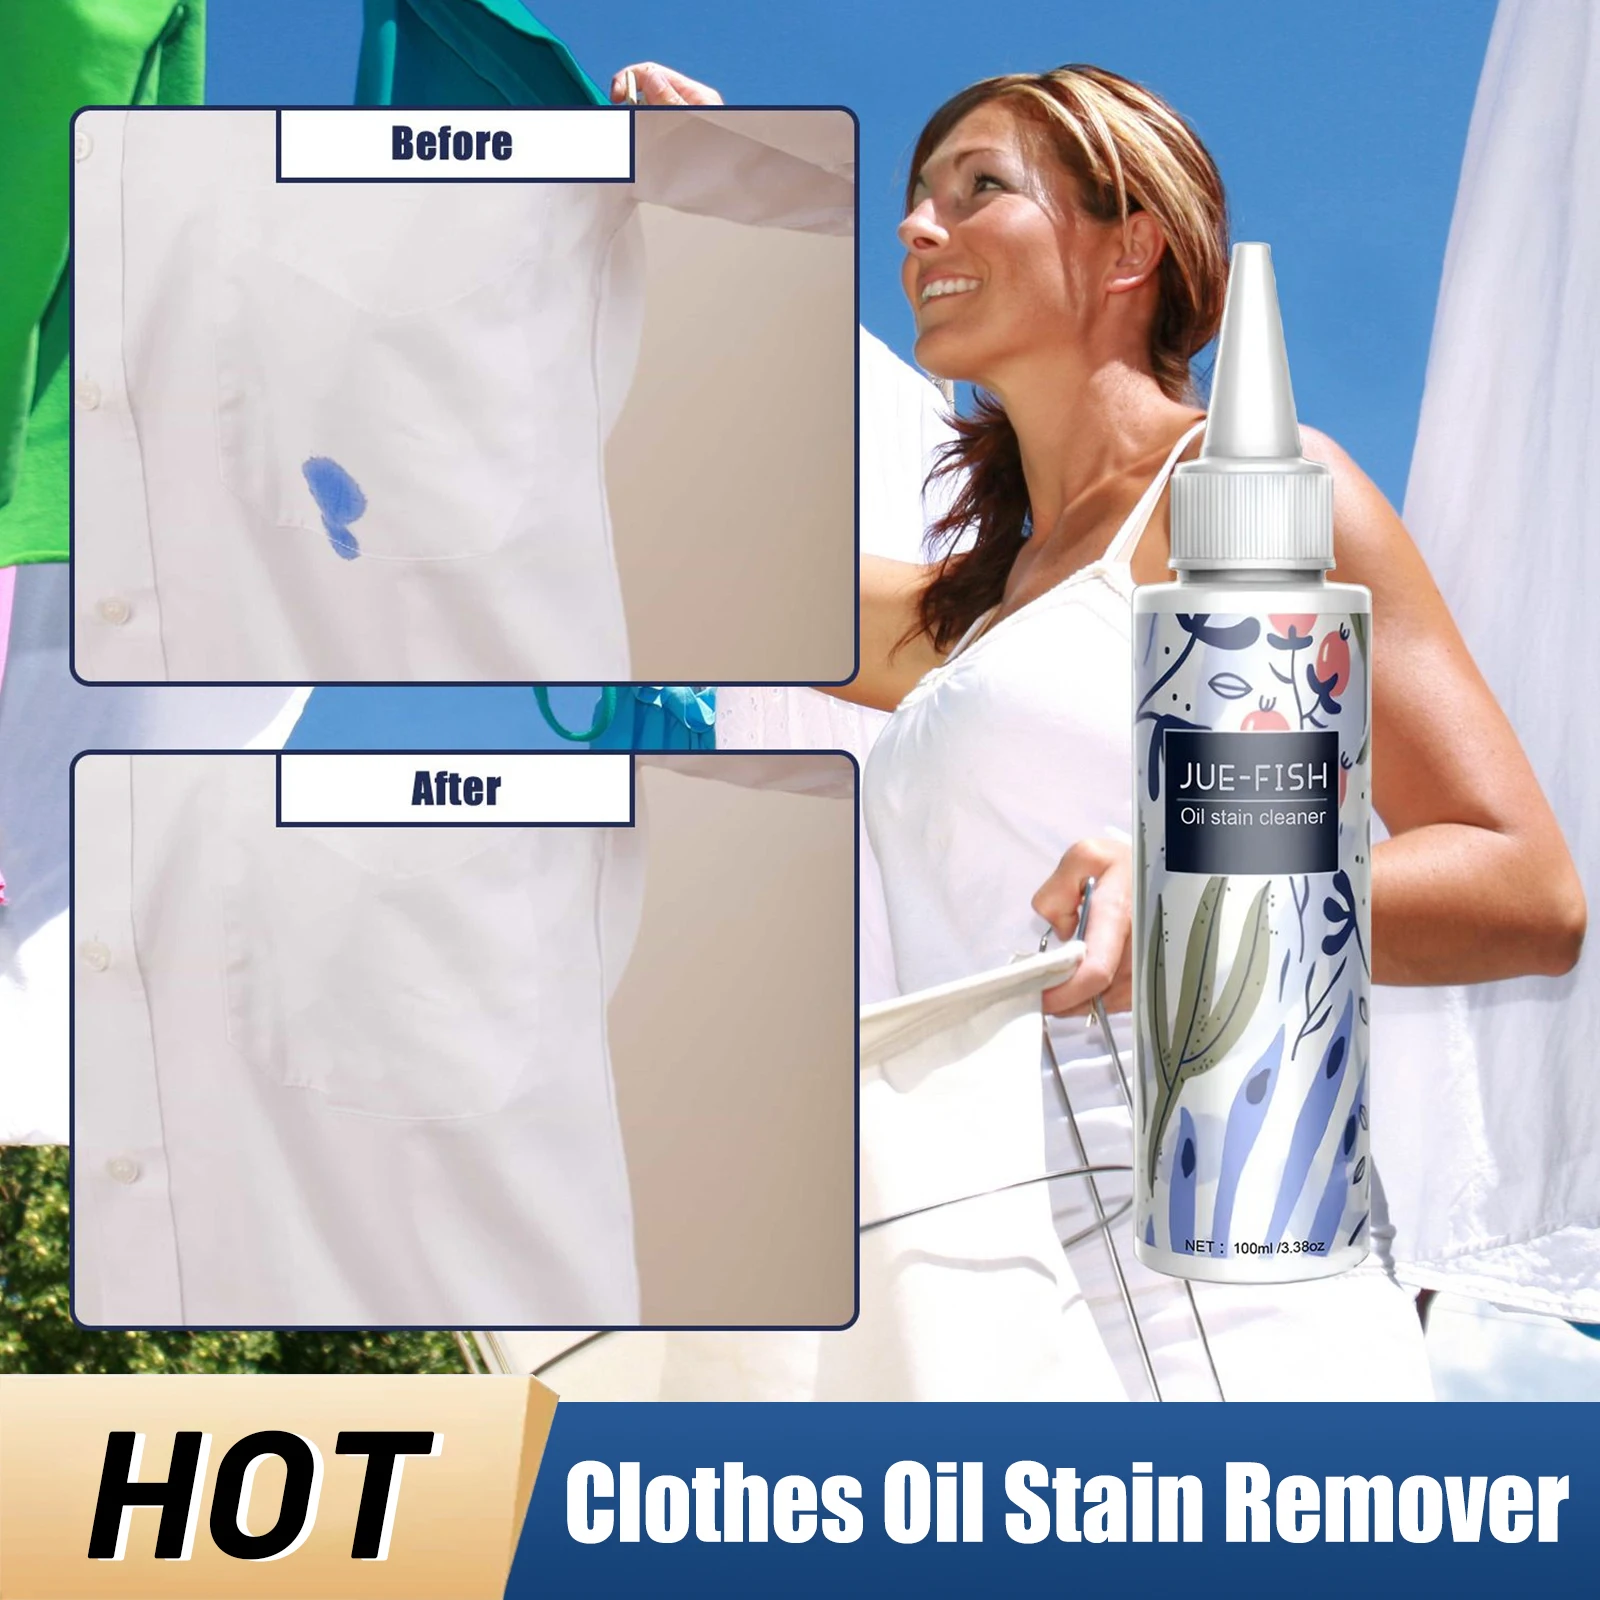 Clothes remover